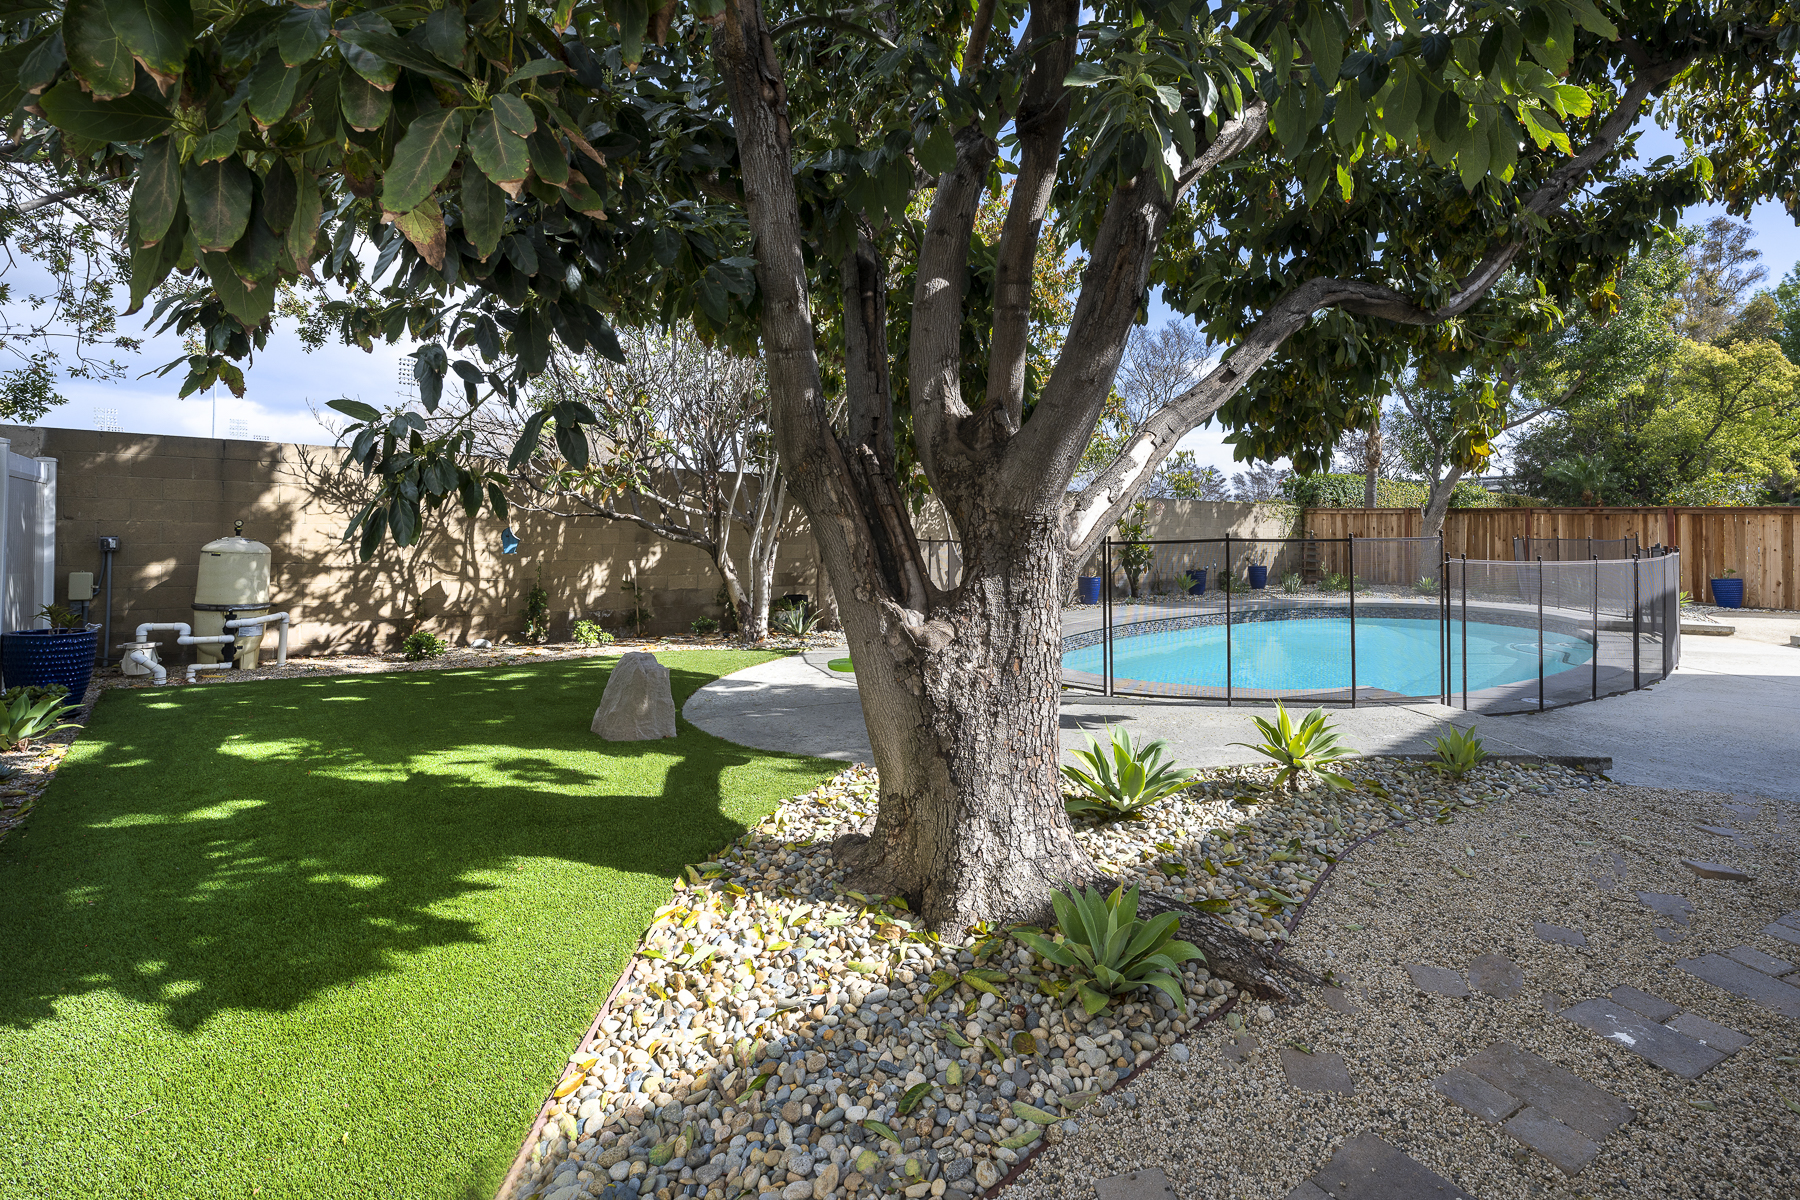 Backyard with large tree, grass patch, stone pathway, and pool with surrounding gate